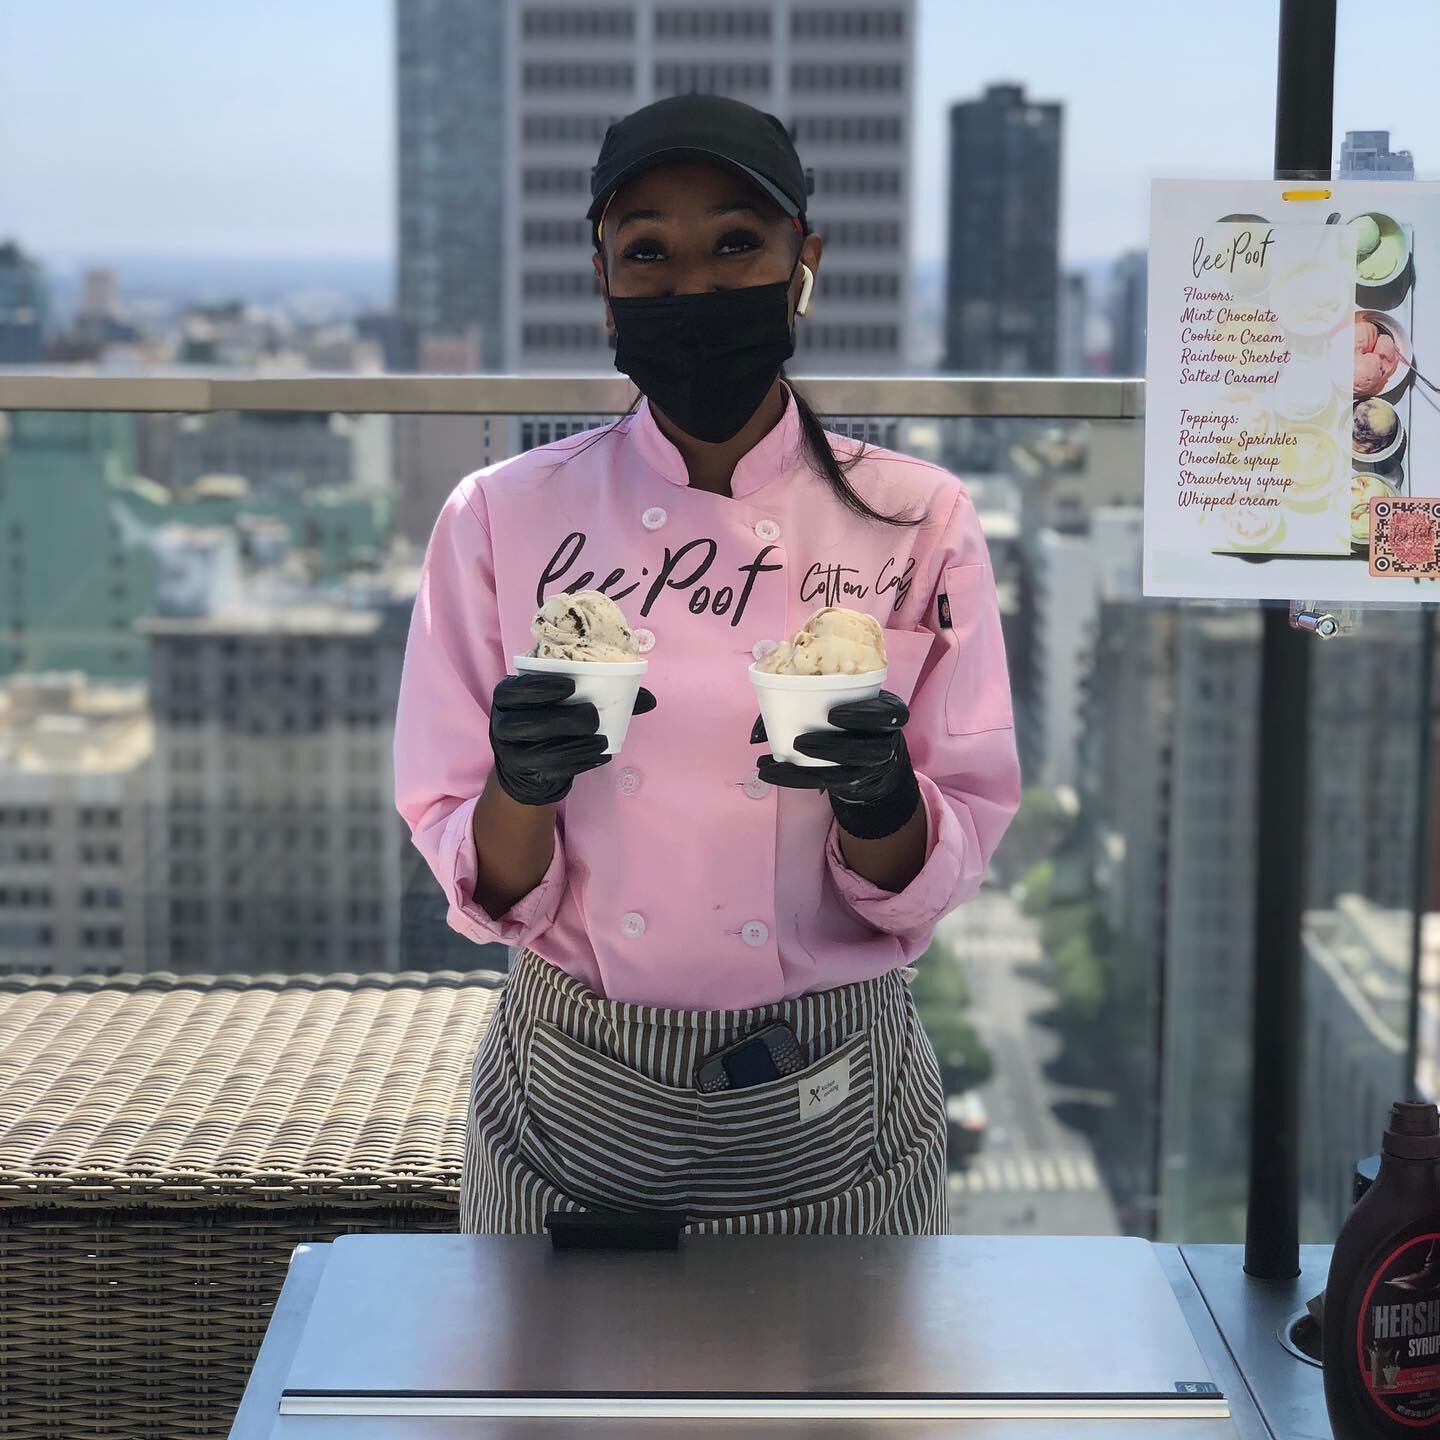 Life is like ice cream. Enjoy it before it melts! 🍦😍

We had the pleasure of having @leepoofs Ice Cream on Wheels this past Saturday for the residents at @parkfifthtower. We can&rsquo;t speak highly enough of the memorable time that Moenay brought 